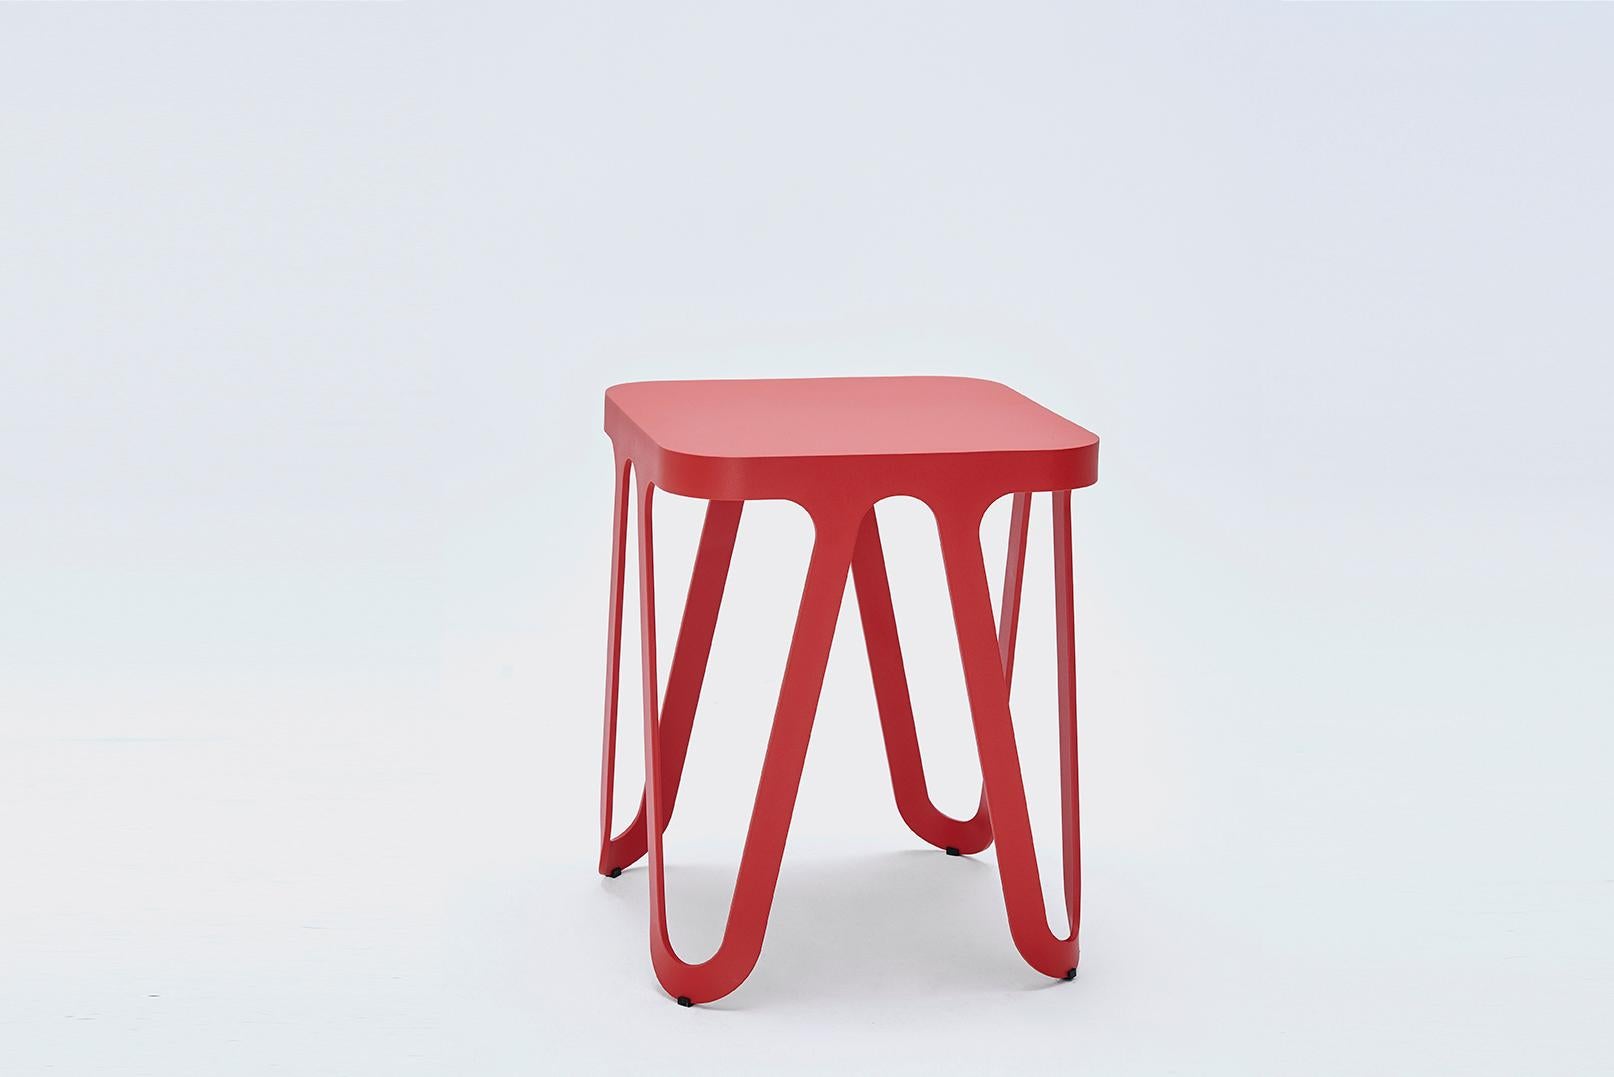 Red loop stool by Sebastian Scherer
Dimensions: D38 x W38 x H44 cm
Material: Aluminium
Weight 3.5 kg
Also available in wood.
Also available in colours: snow white / light sand / sun yellow / clay orange / rust red / space blue / graphite grey /